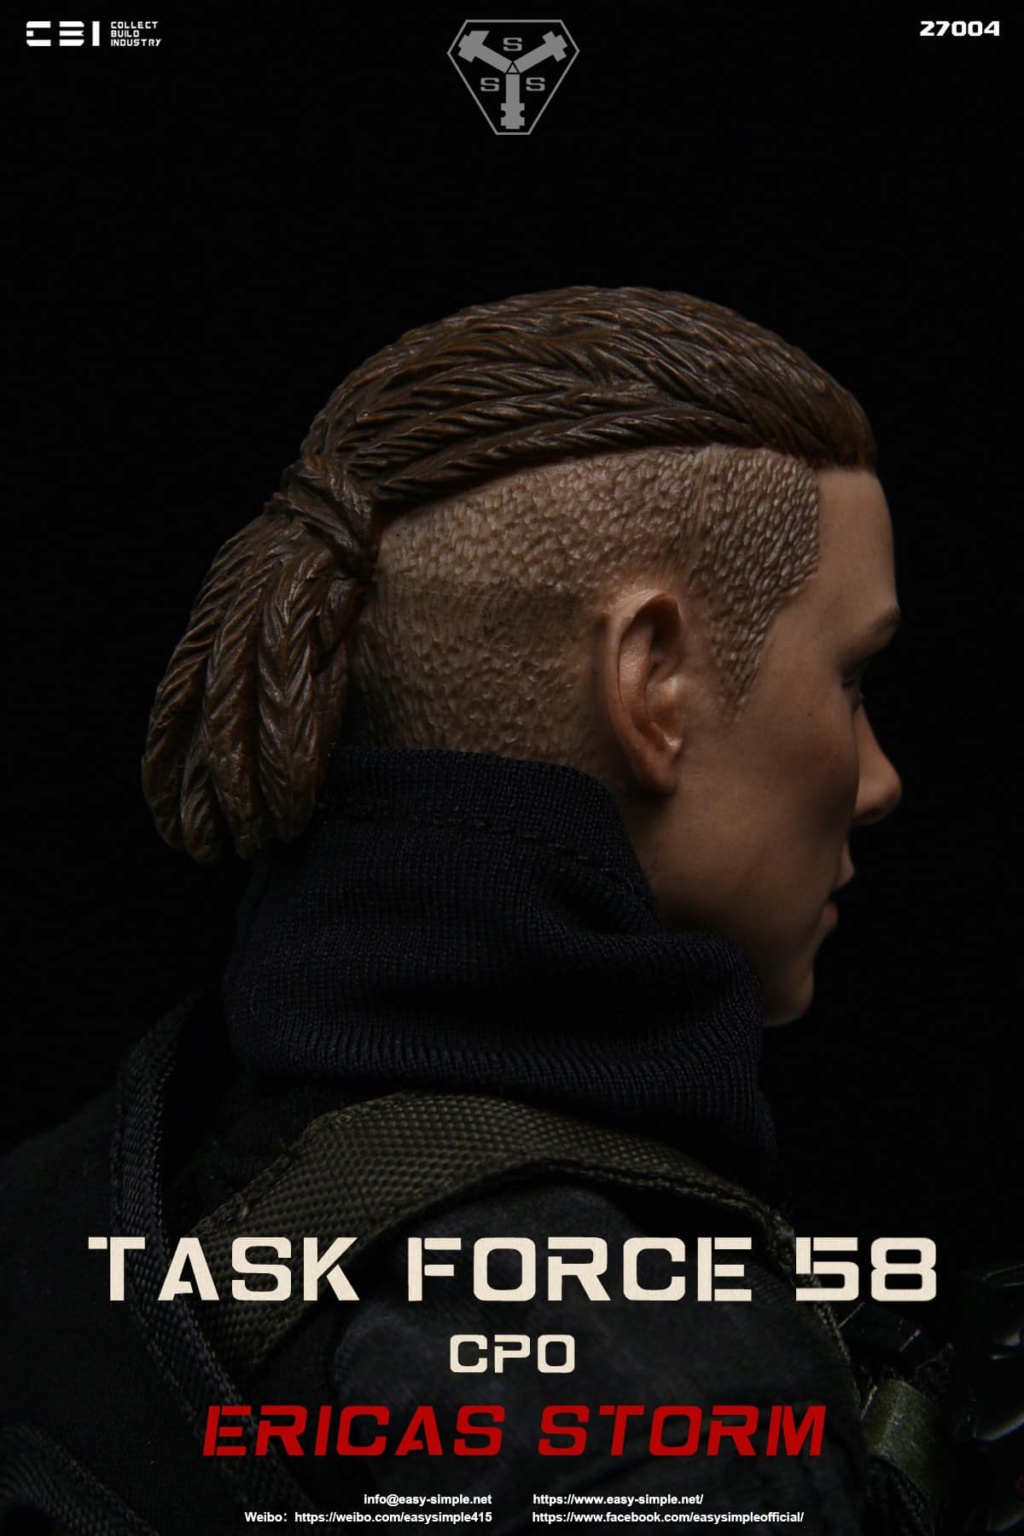 easy - NEW PRODUCT: CBI & Easy&Simple: 27004 1/6 ERICA STORM - TASK FORCE 58 CPO action figure 4731